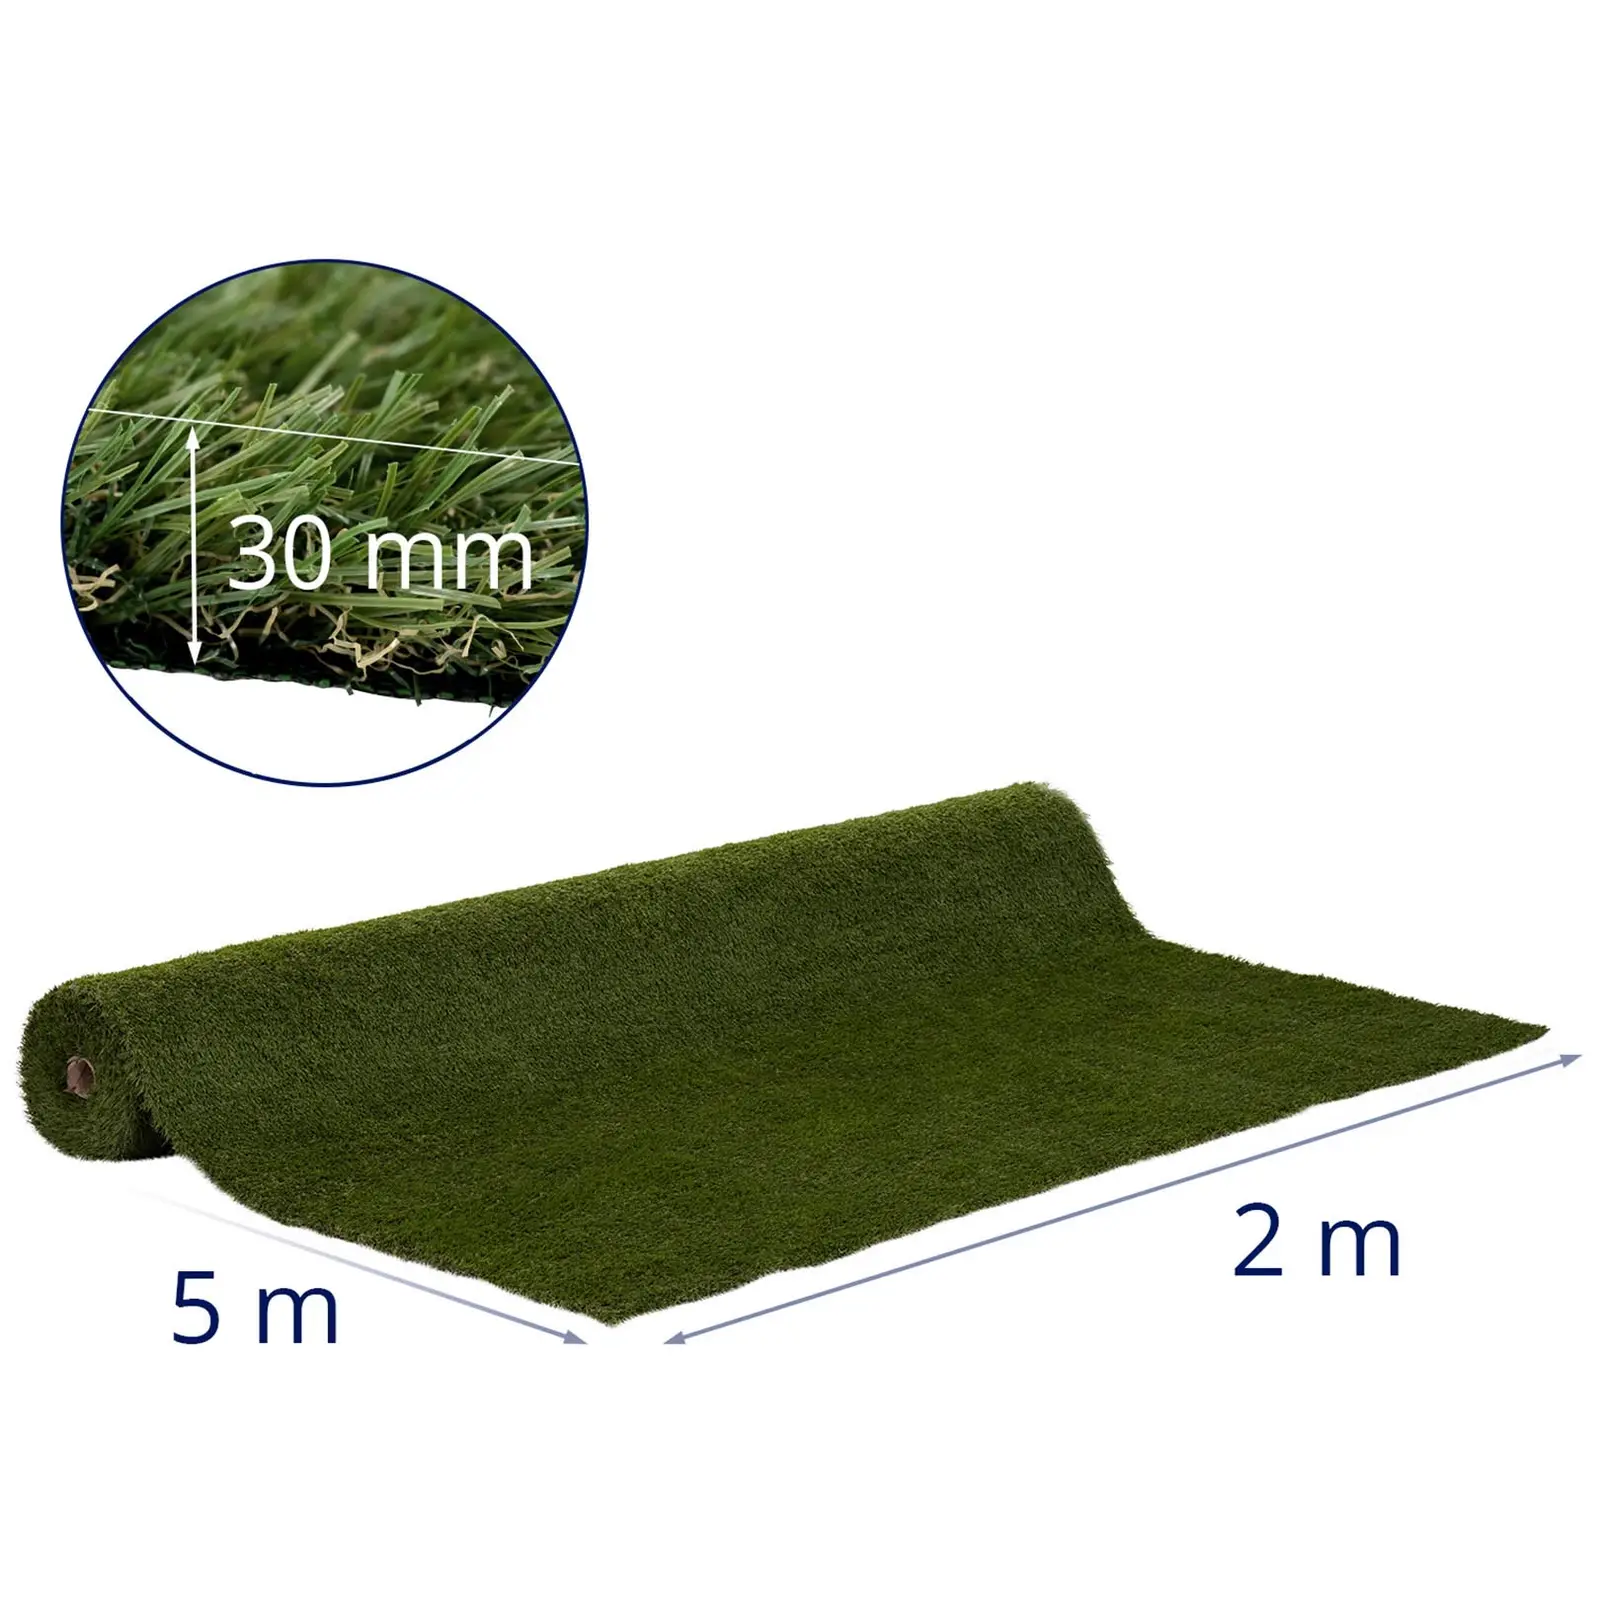 Artificial grass - 200 x 500 cm - Height: 30 mm - Stitch rate: 20/10 cm - UV-resistant